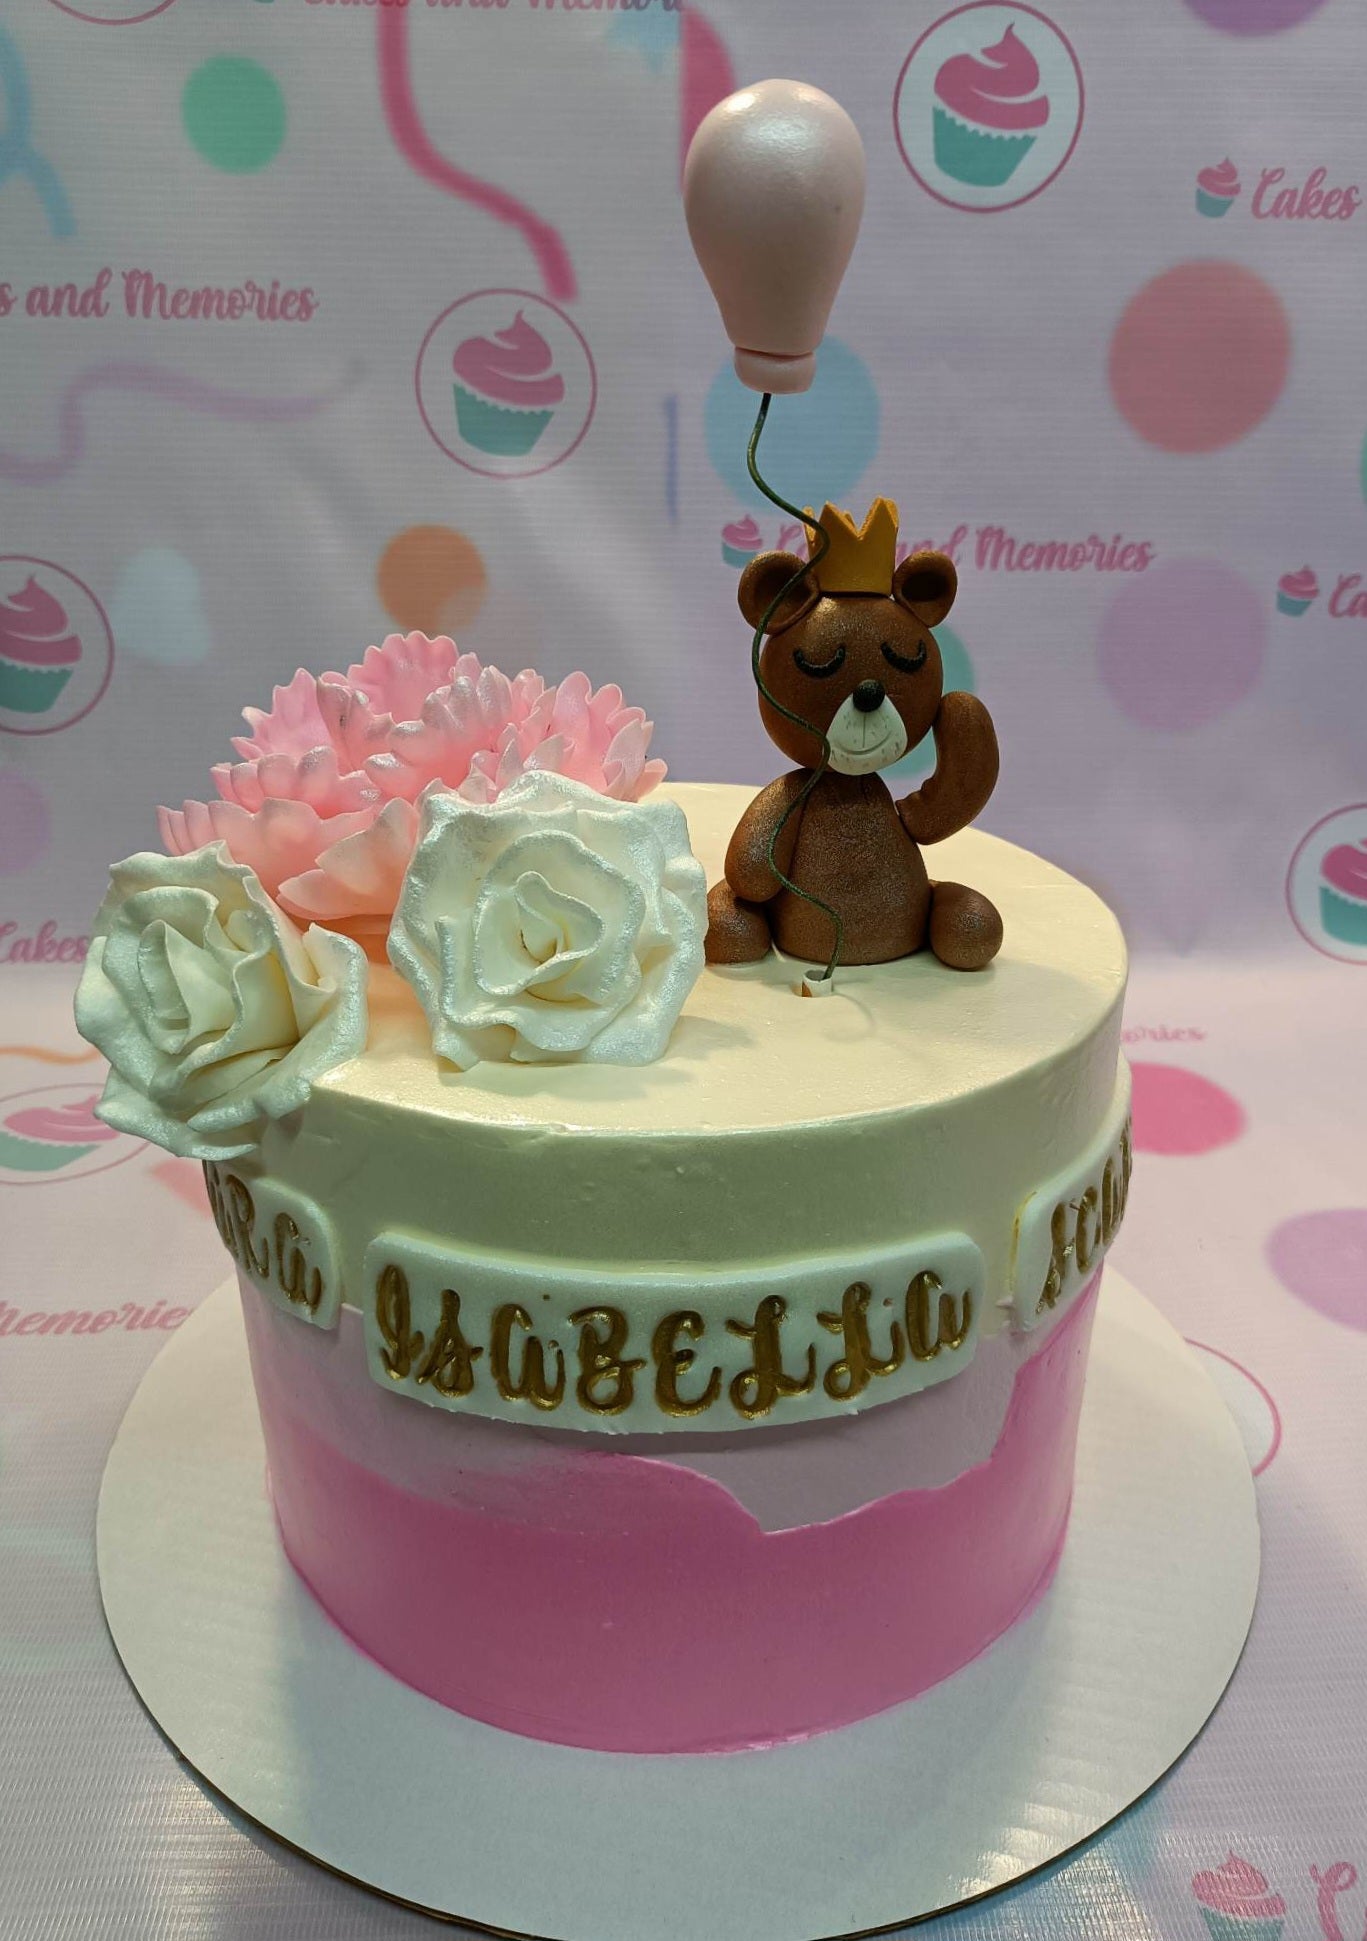 This spectacular Bears Cake is perfect for your special occasion. It features pink and white teddy bears, wild animals, and a balloon. All of our custom decorated cakes are of the highest quality. Celebrate in style with this Birthday Cake!